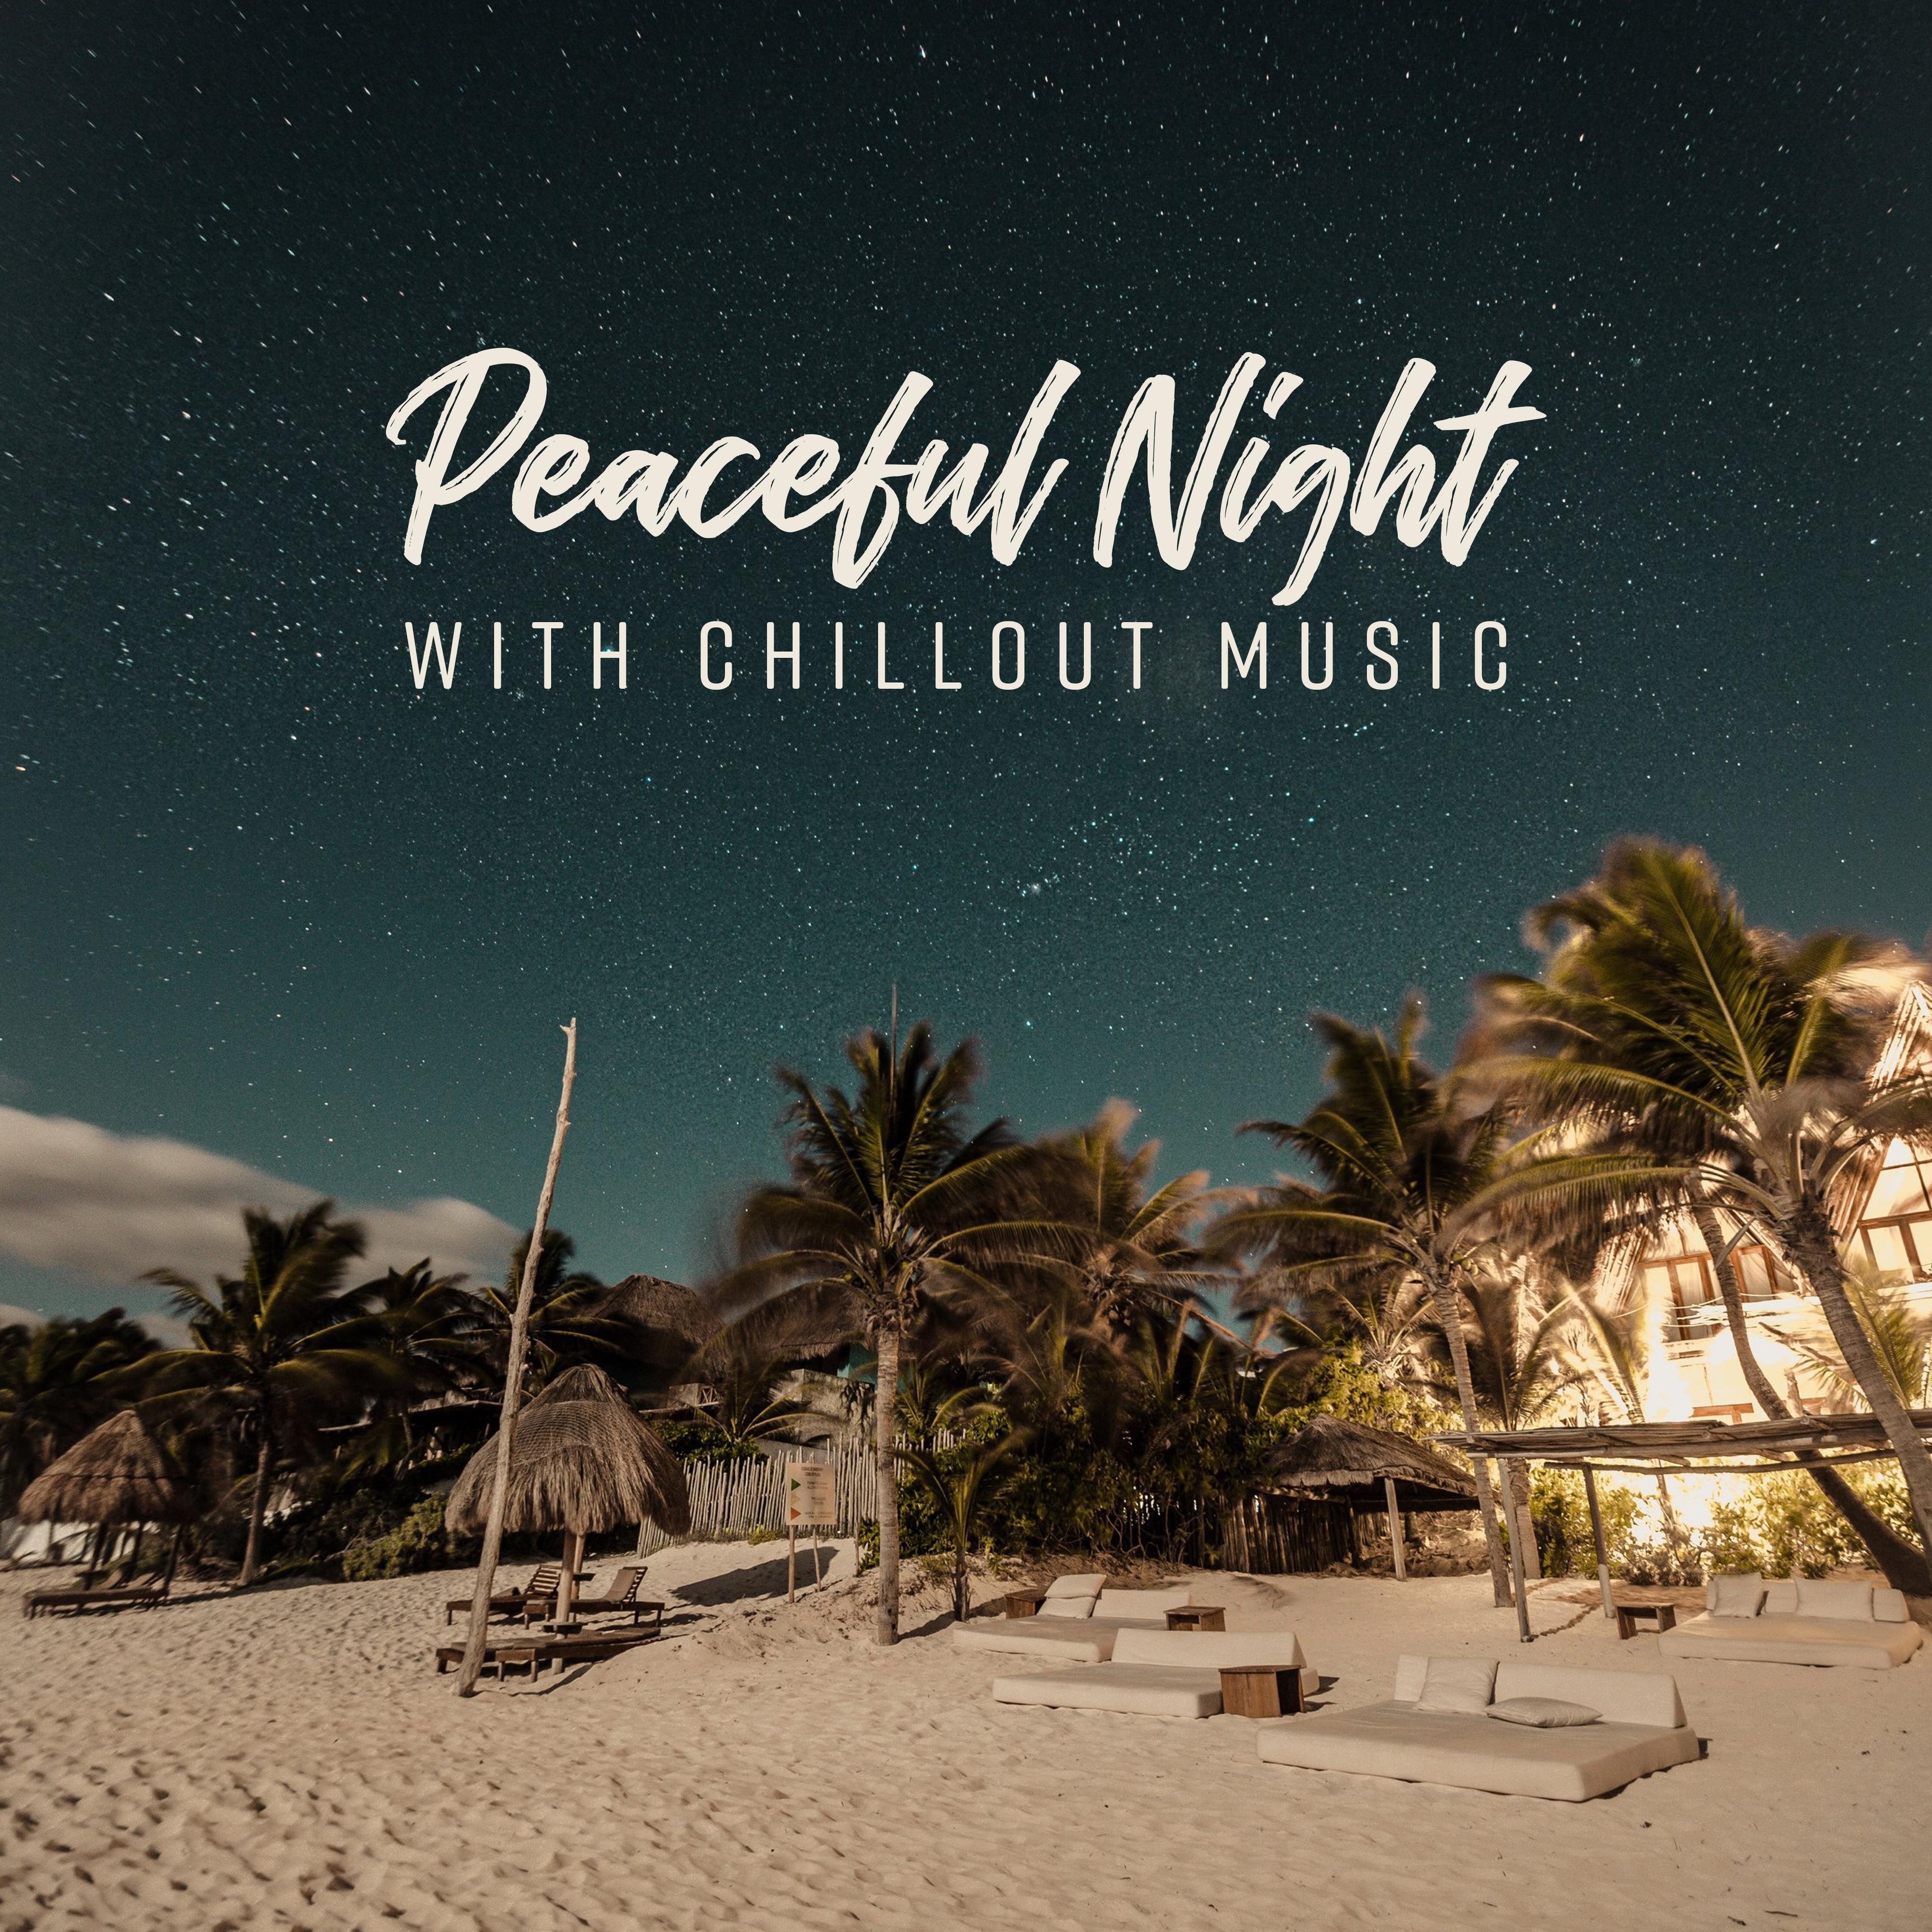 Peaceful Night with Chillout Music